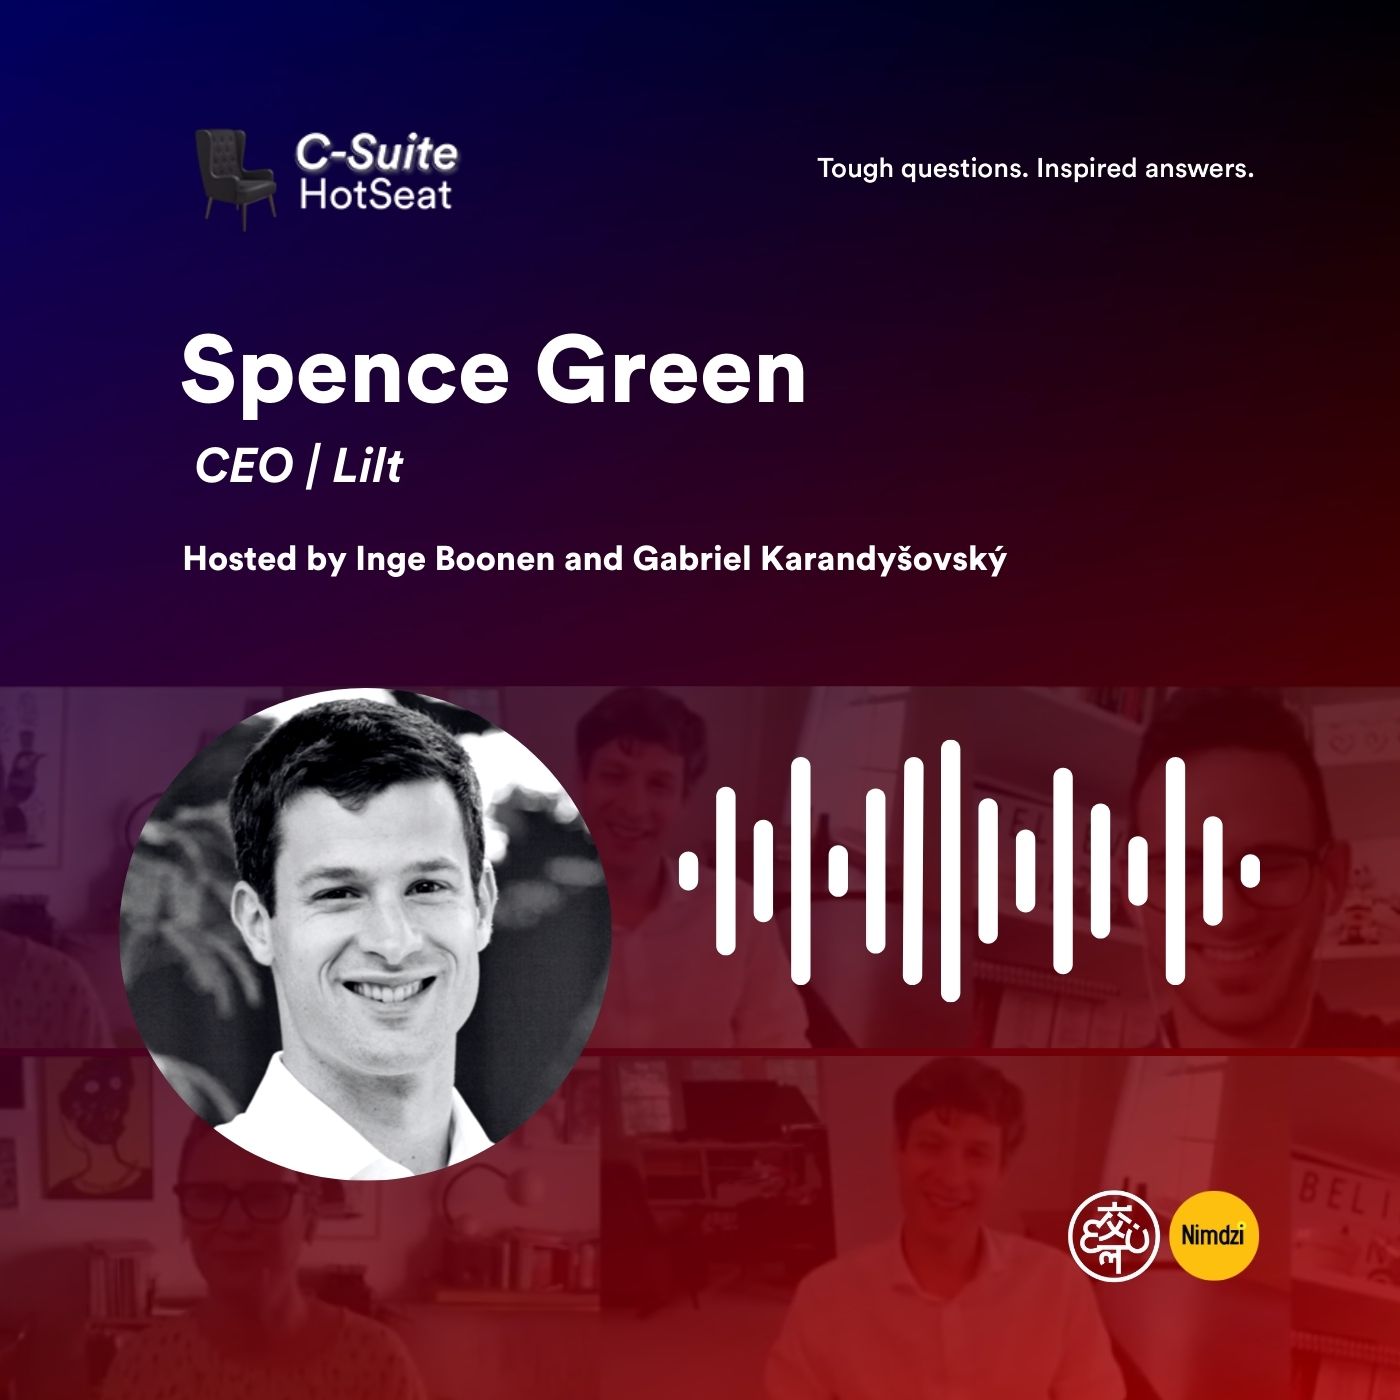 Play to Your Strengths With CEO Spence Green | C-Suite HotSeat E07